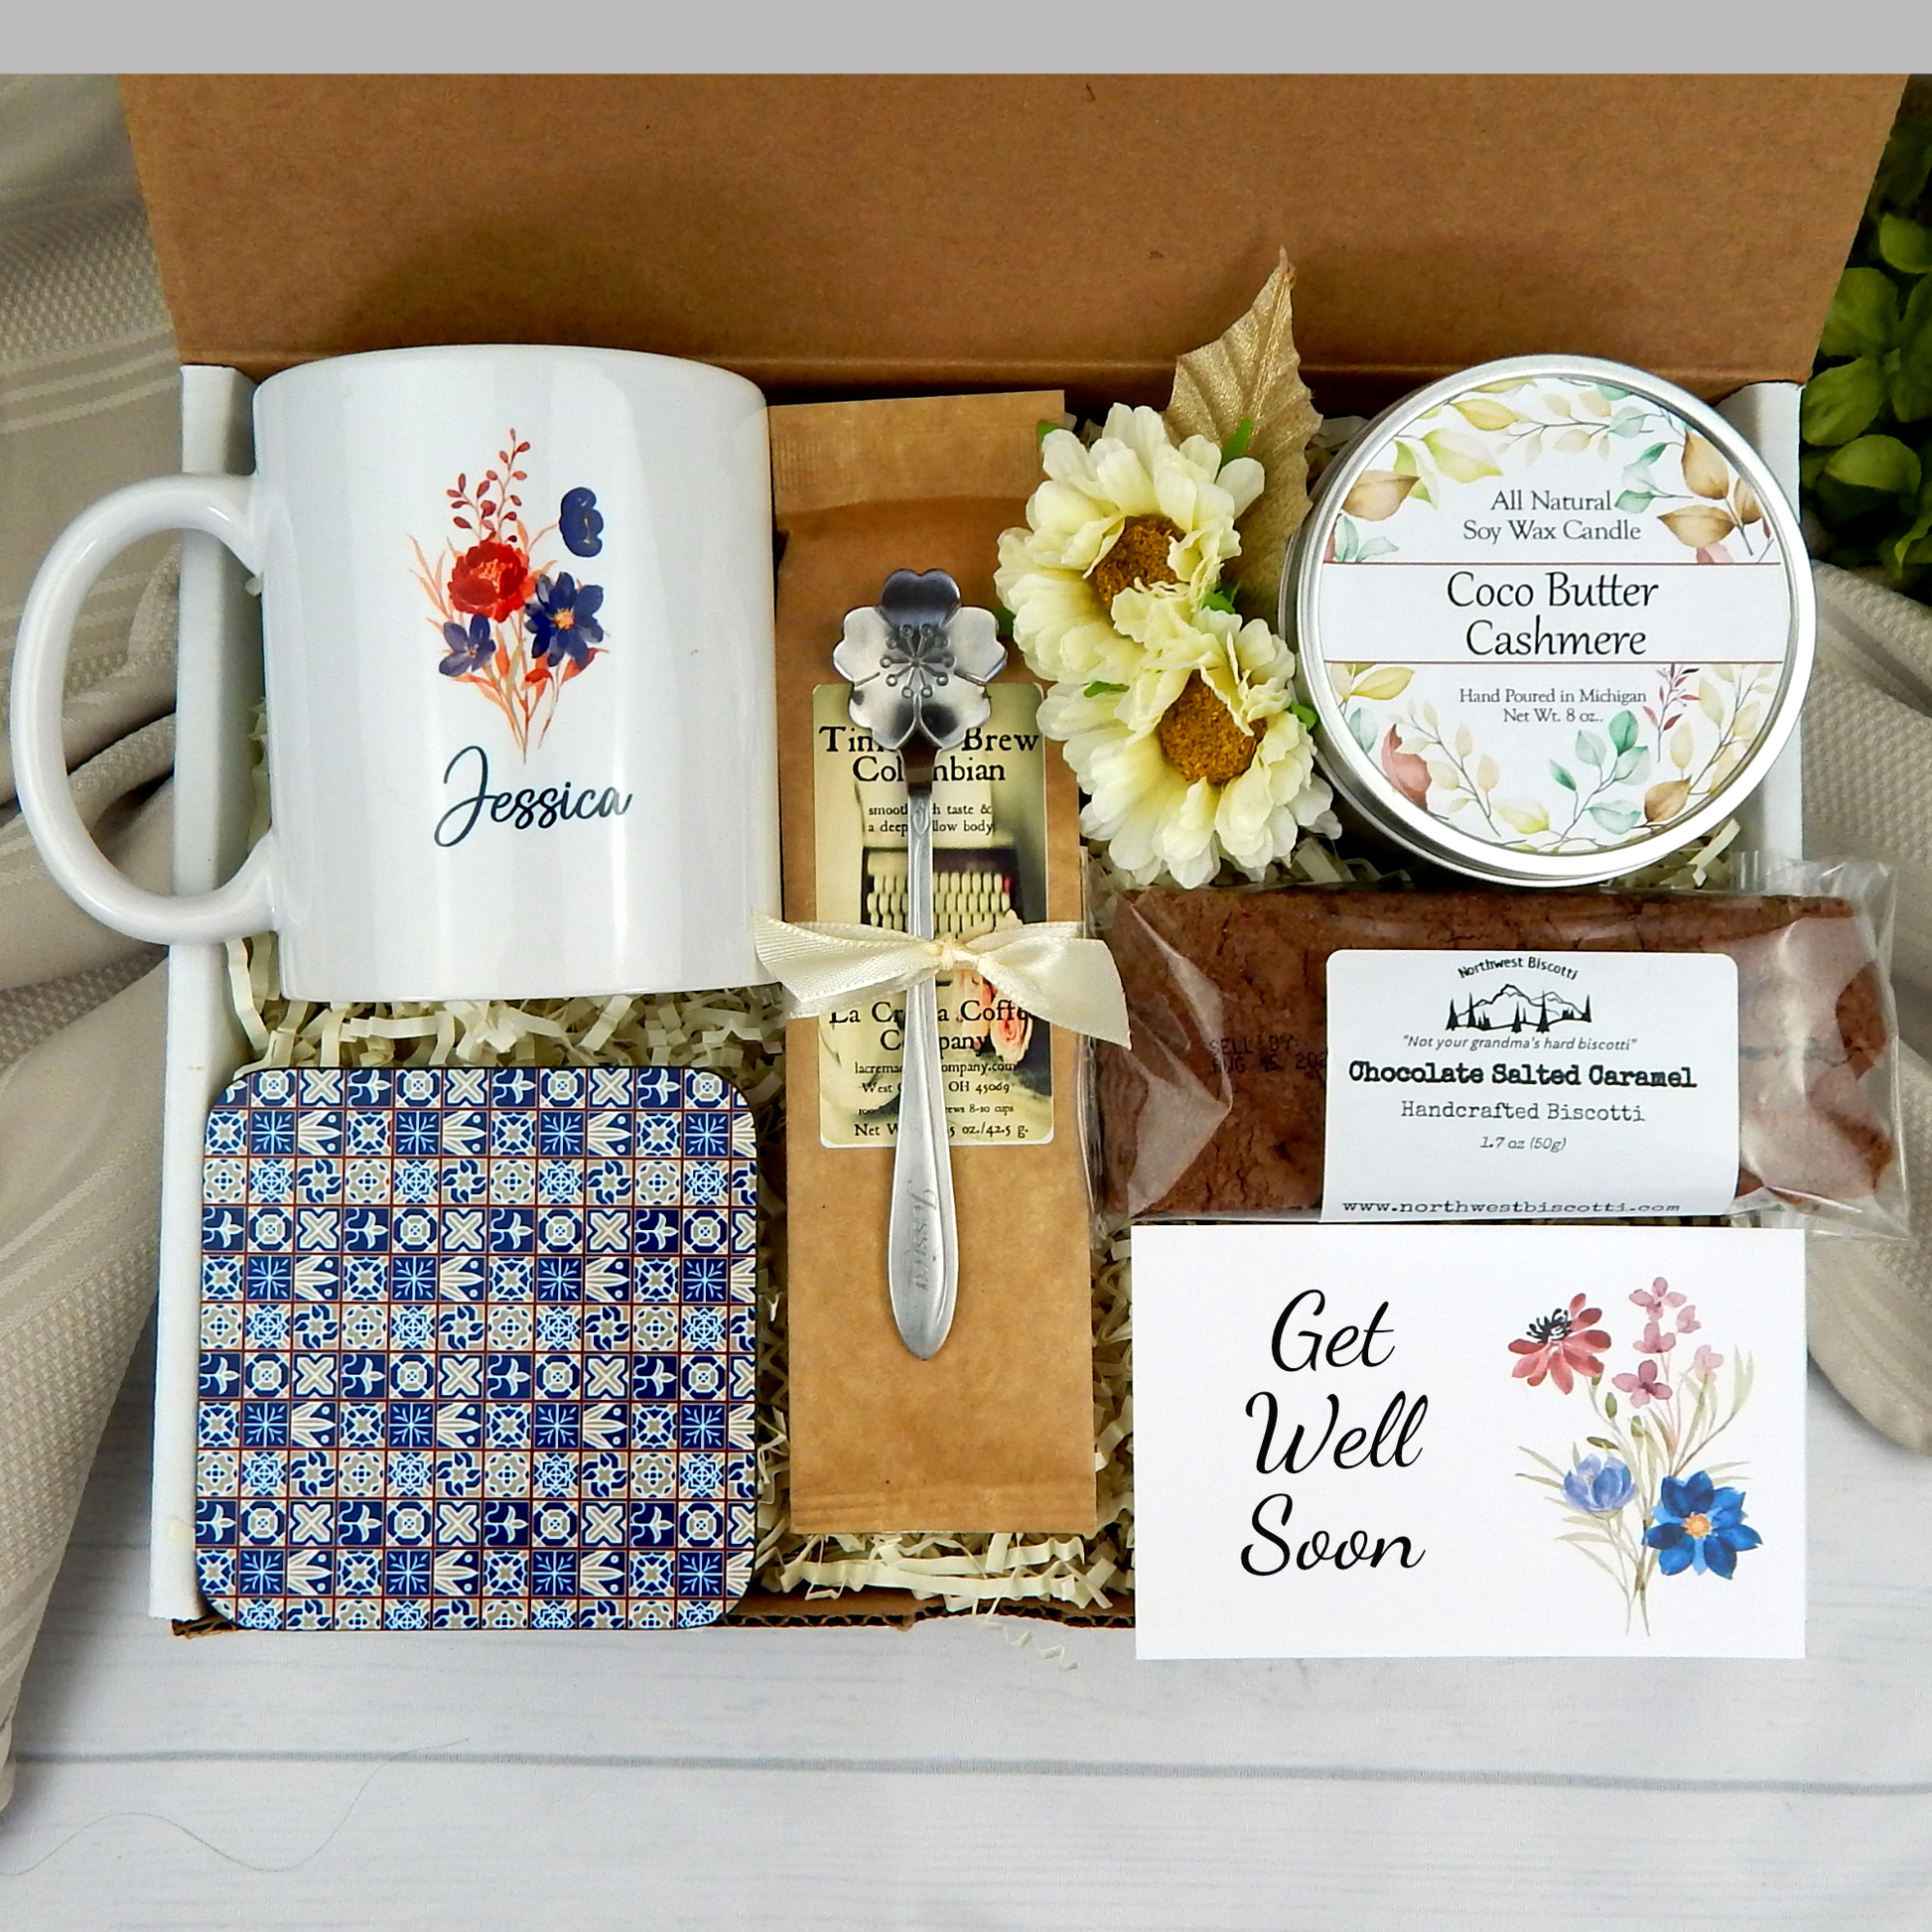 Get Well Soon Care Package - Sick Friend Gift Box – Blue Stone River